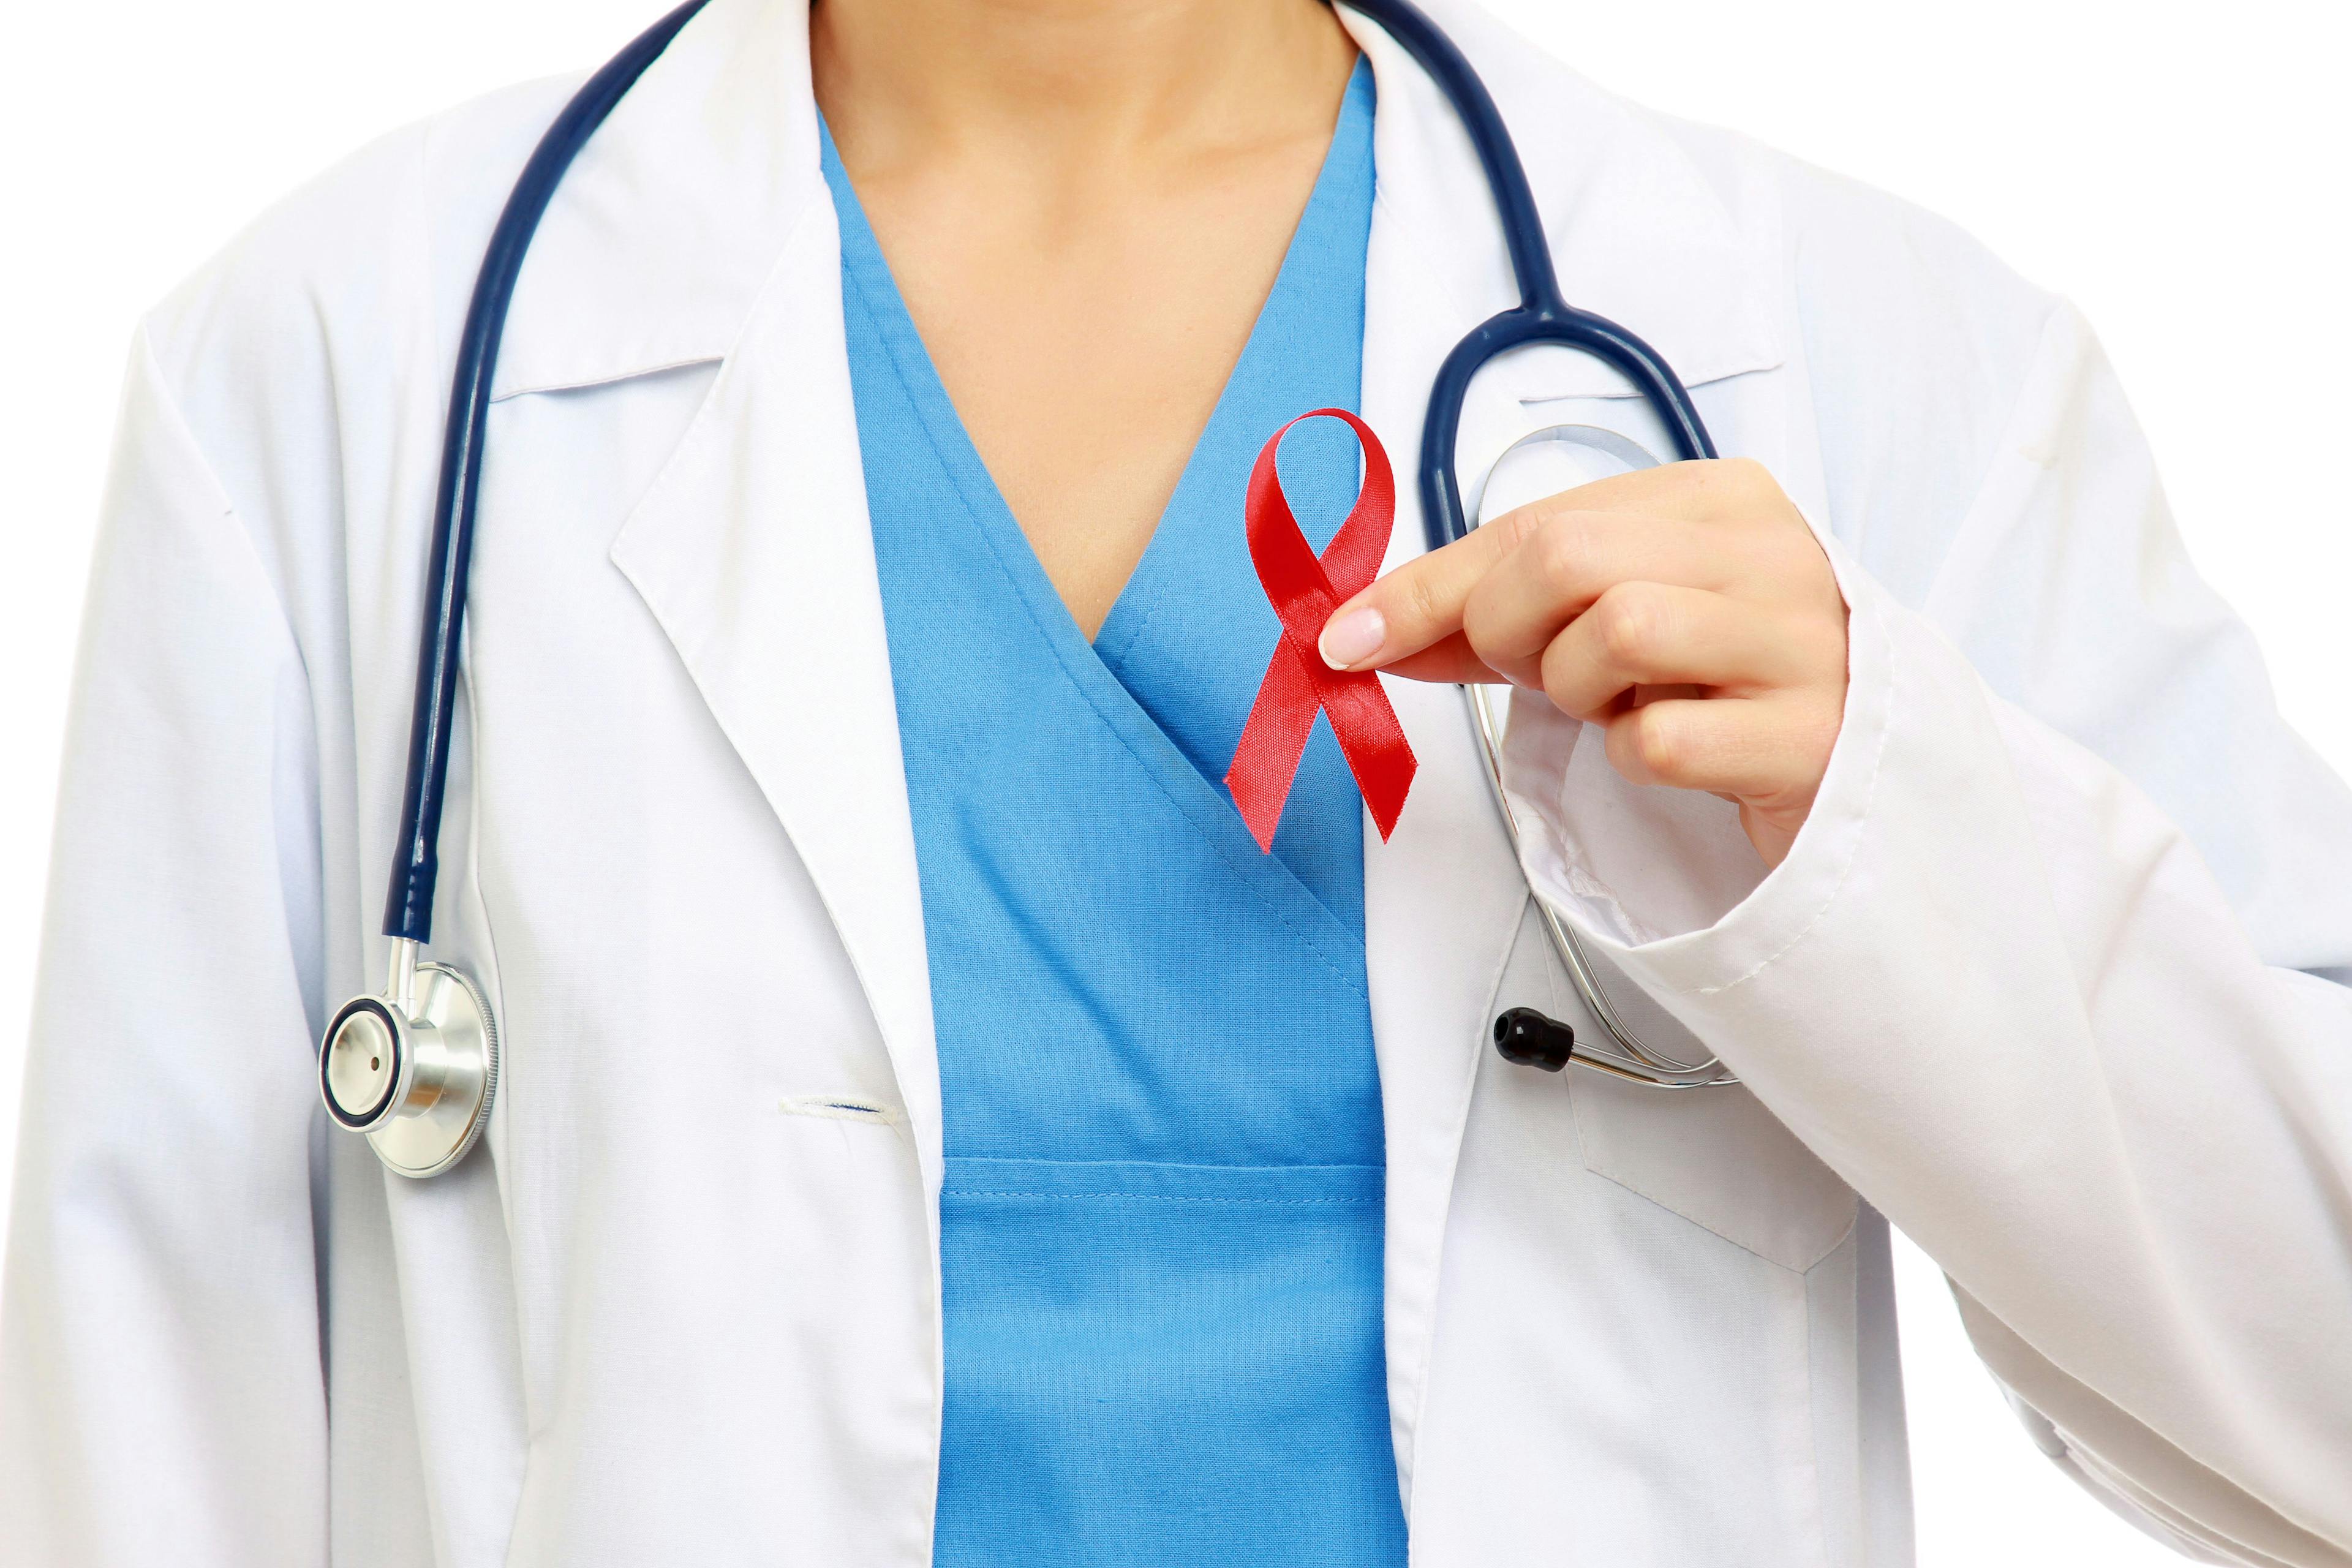 A Comprehensive Approach to HIV Can Mitigate the US Burden, Reduce New Infections